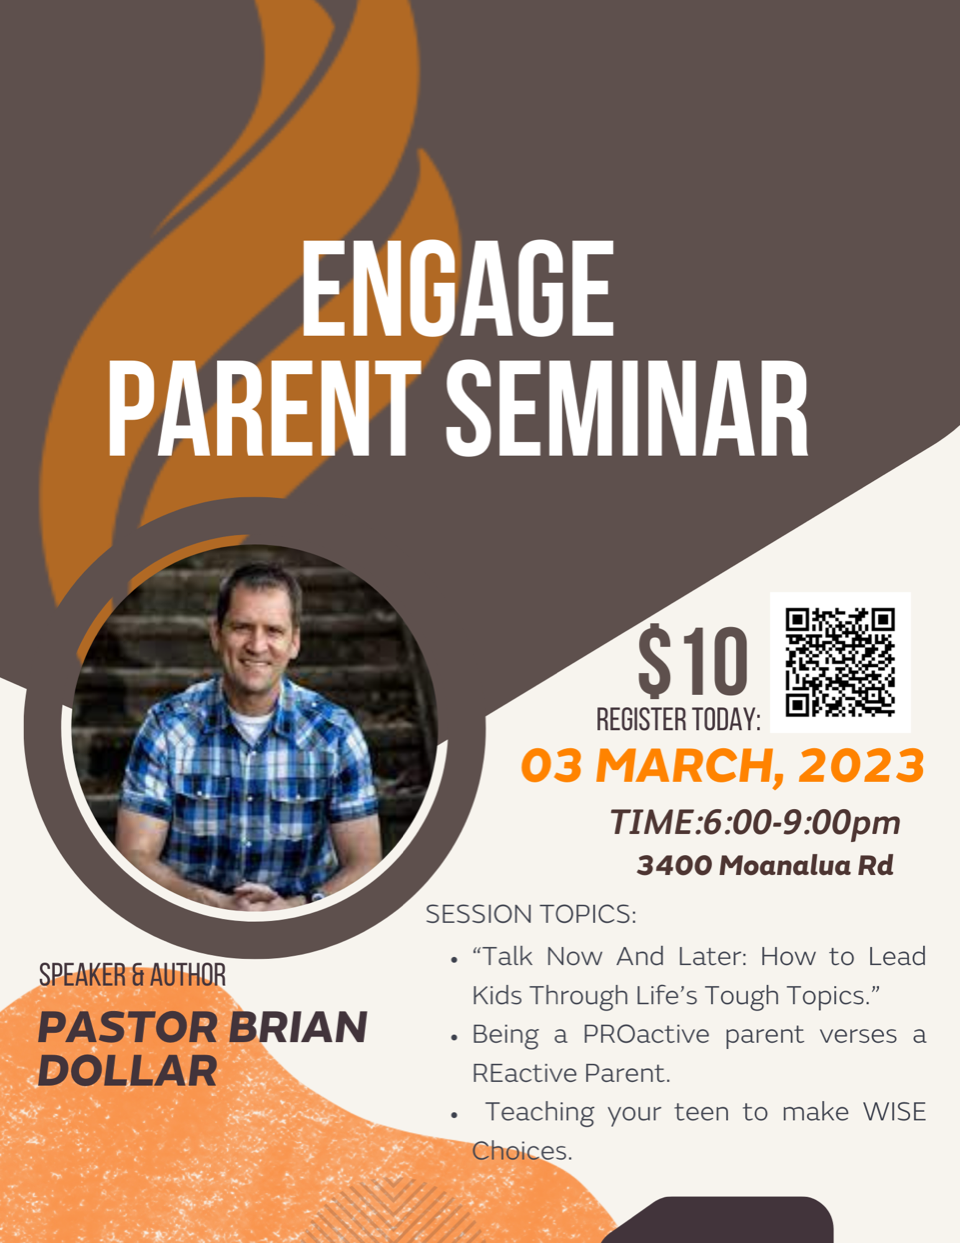 Join Us For: 
Engage Parent Seminar
March 3, 2023 from 6pm to 9pm
First Assembly of God
3400 Moanalua Road
Register today by scanning QR code